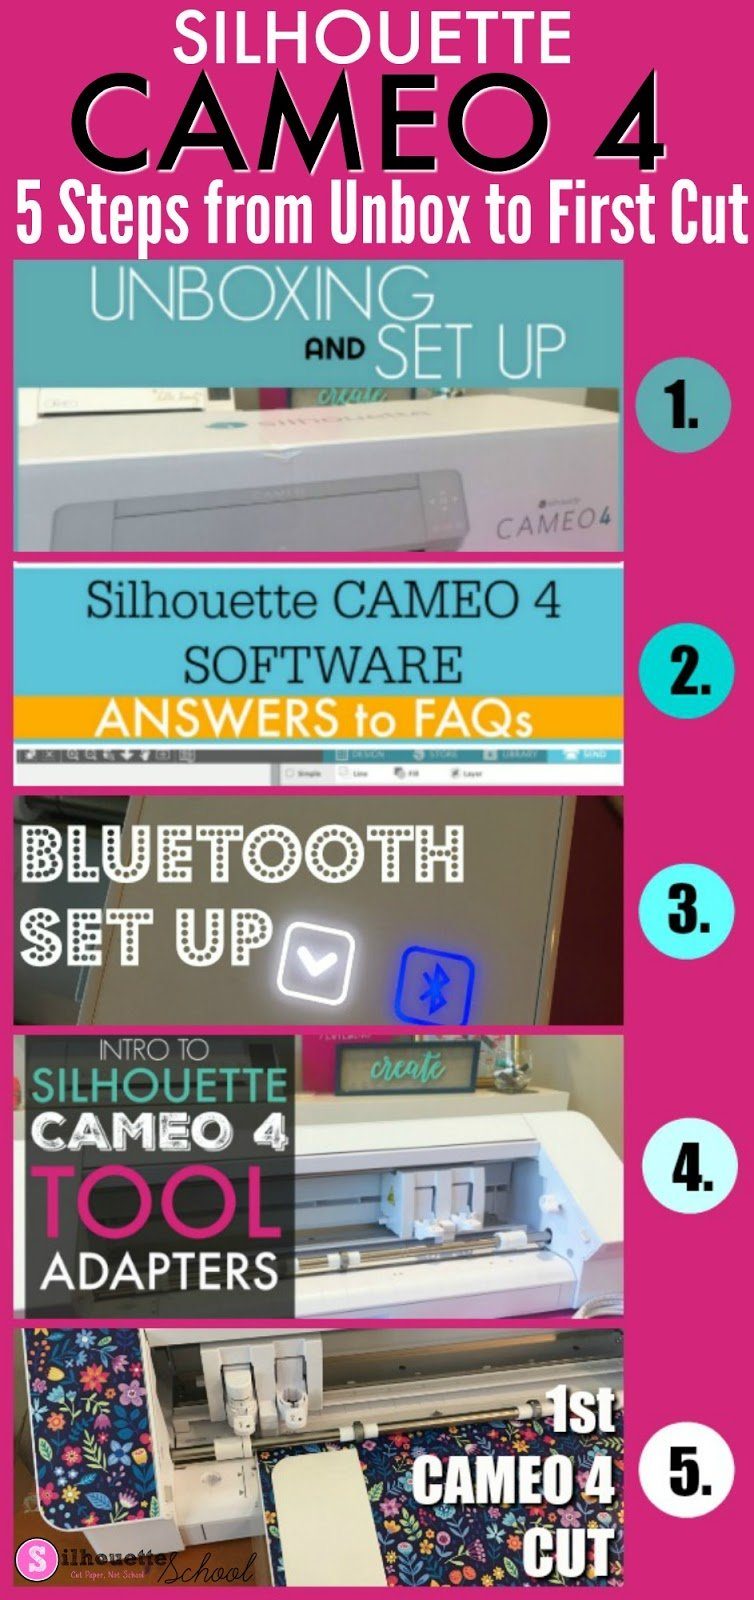 Introducing the Silhouette Cameo 5!